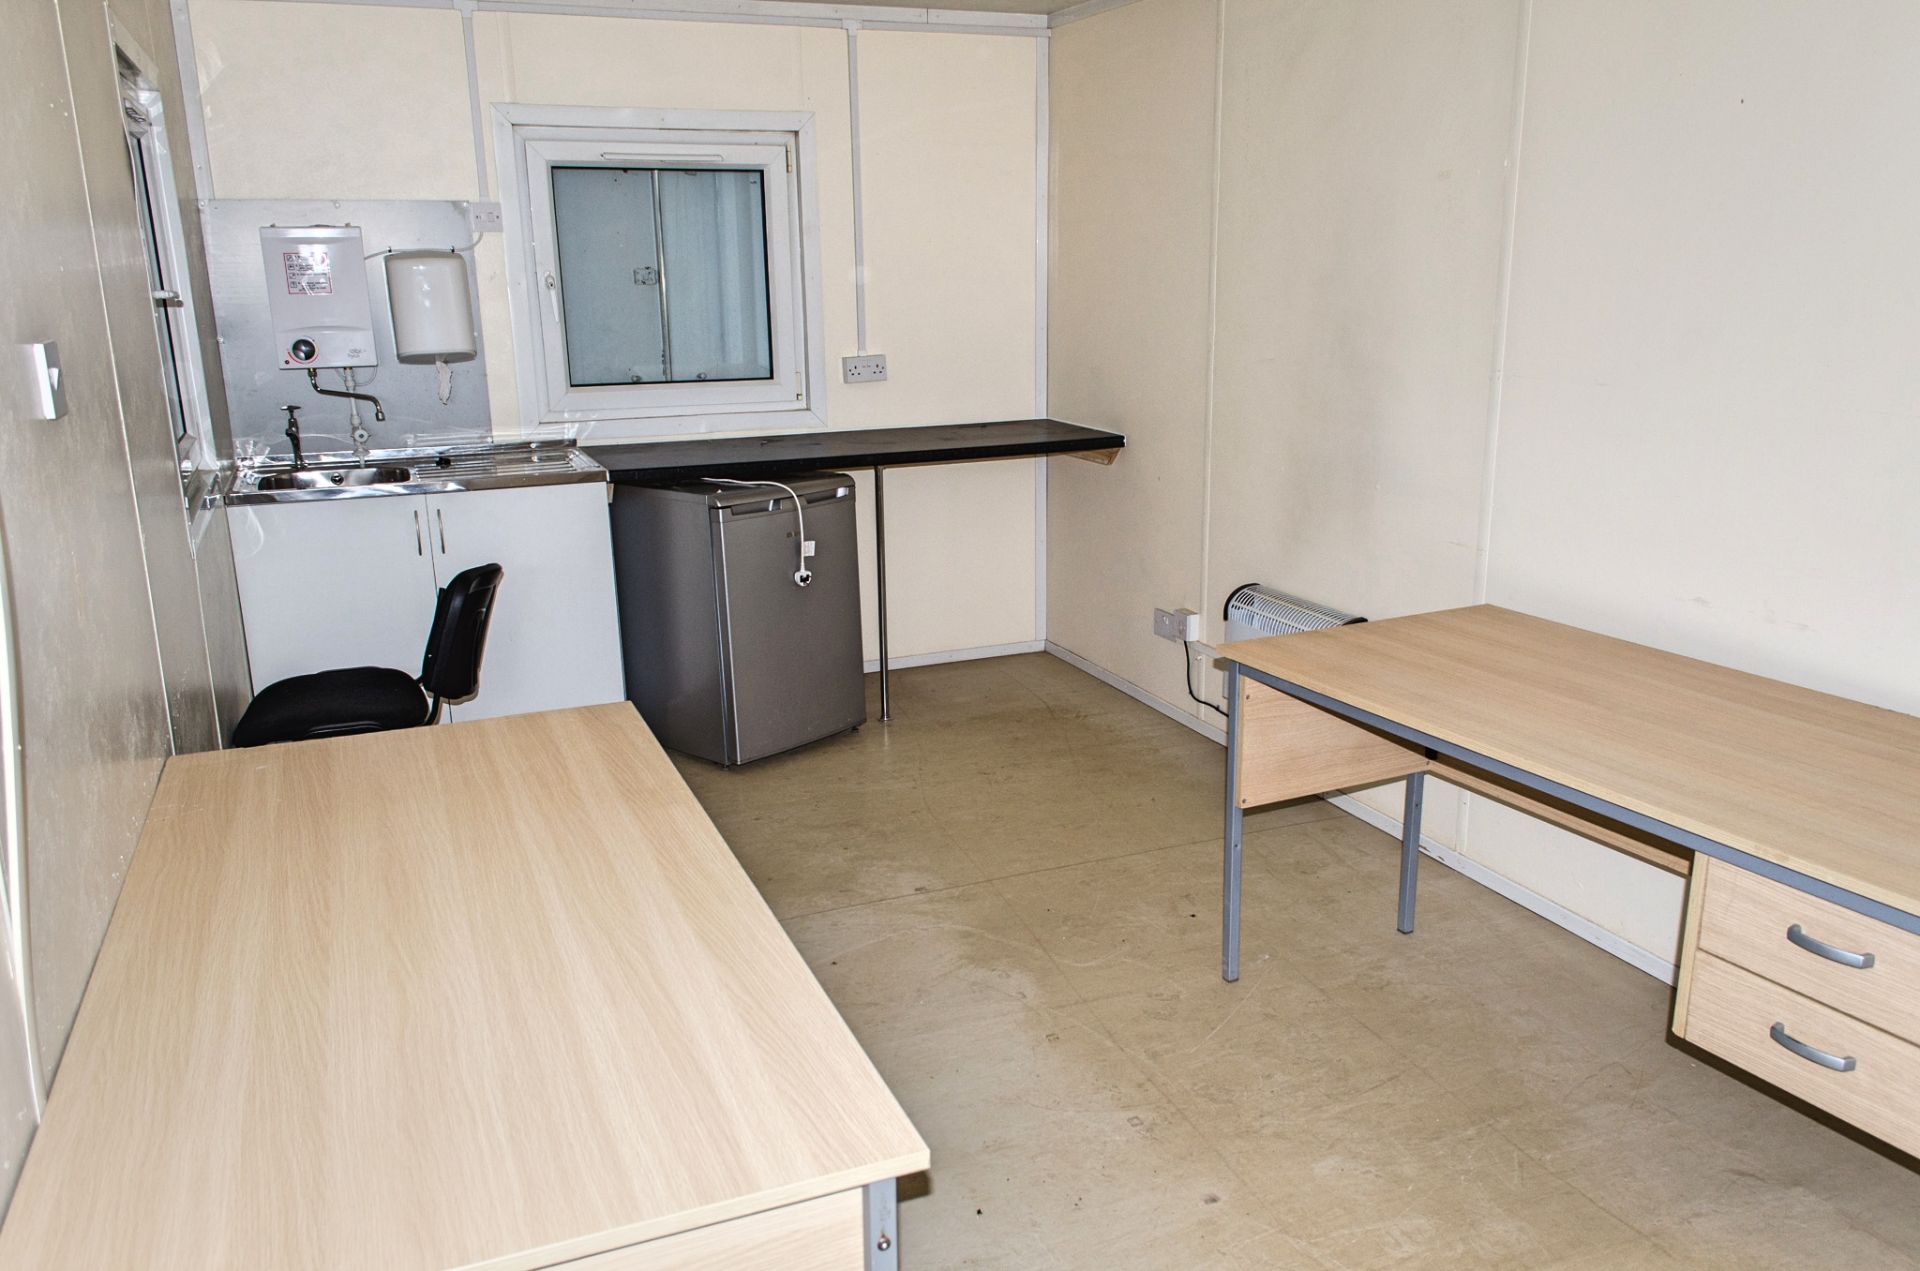 32ft x 10ft steel anti-vandal office site unit Comprising of: kitchen/office area & seperate - Image 5 of 7